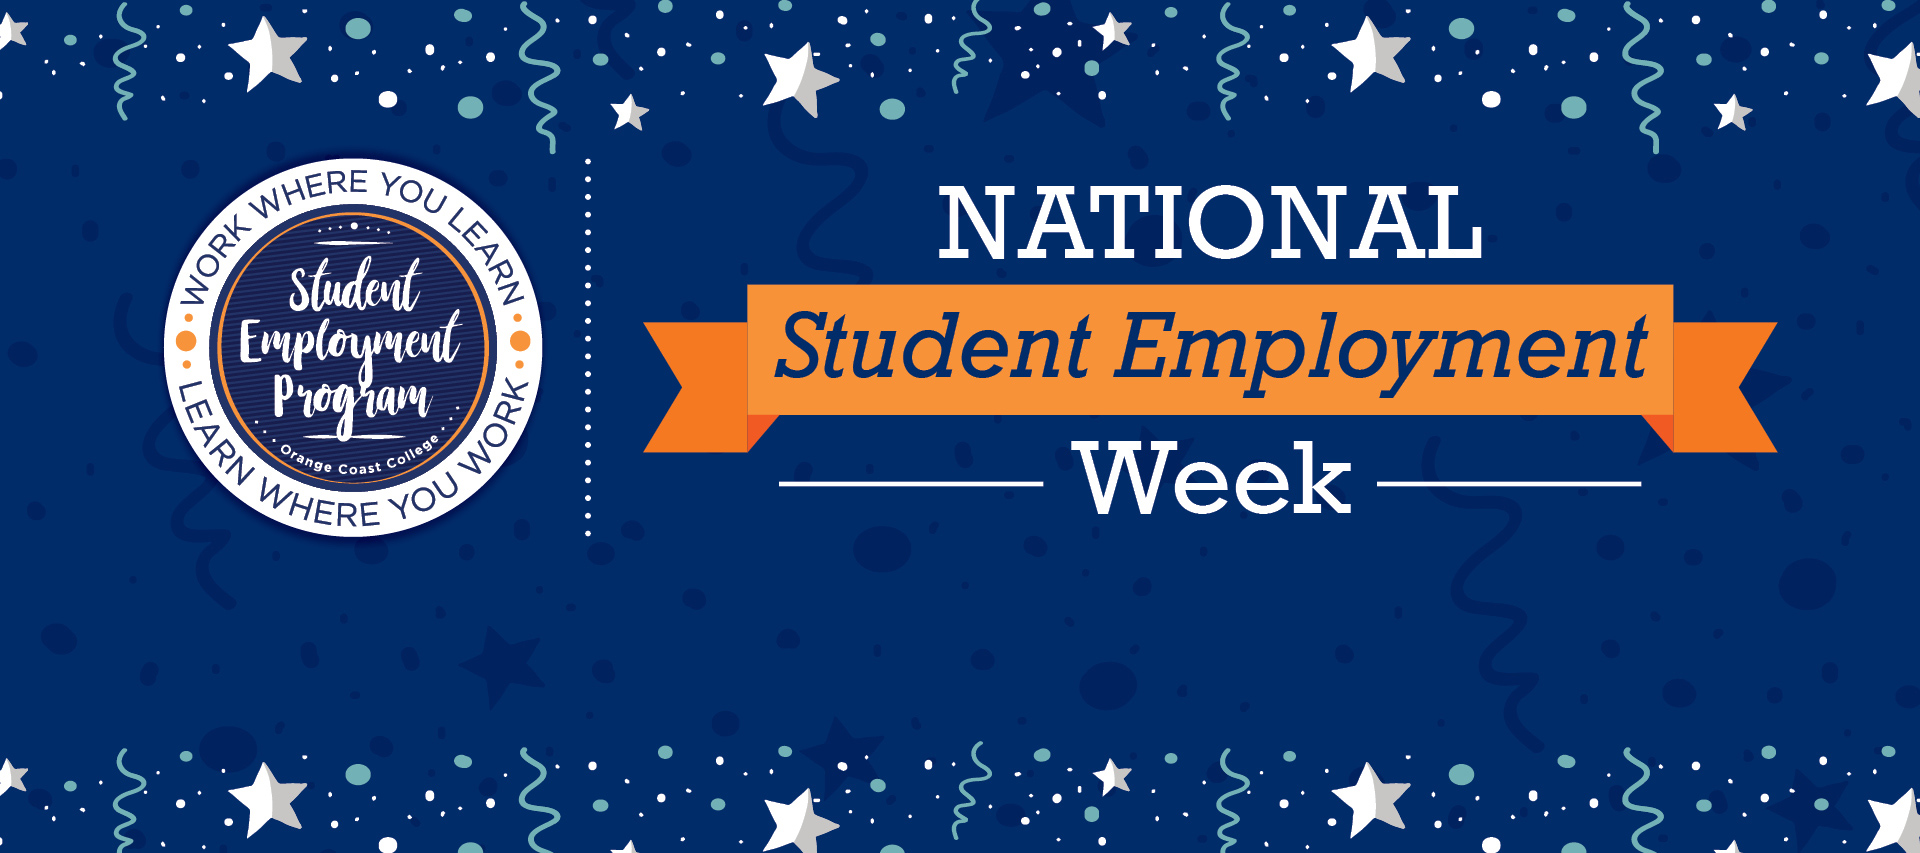 Blue background with stars and streamers. Text: National Student Employment Week.